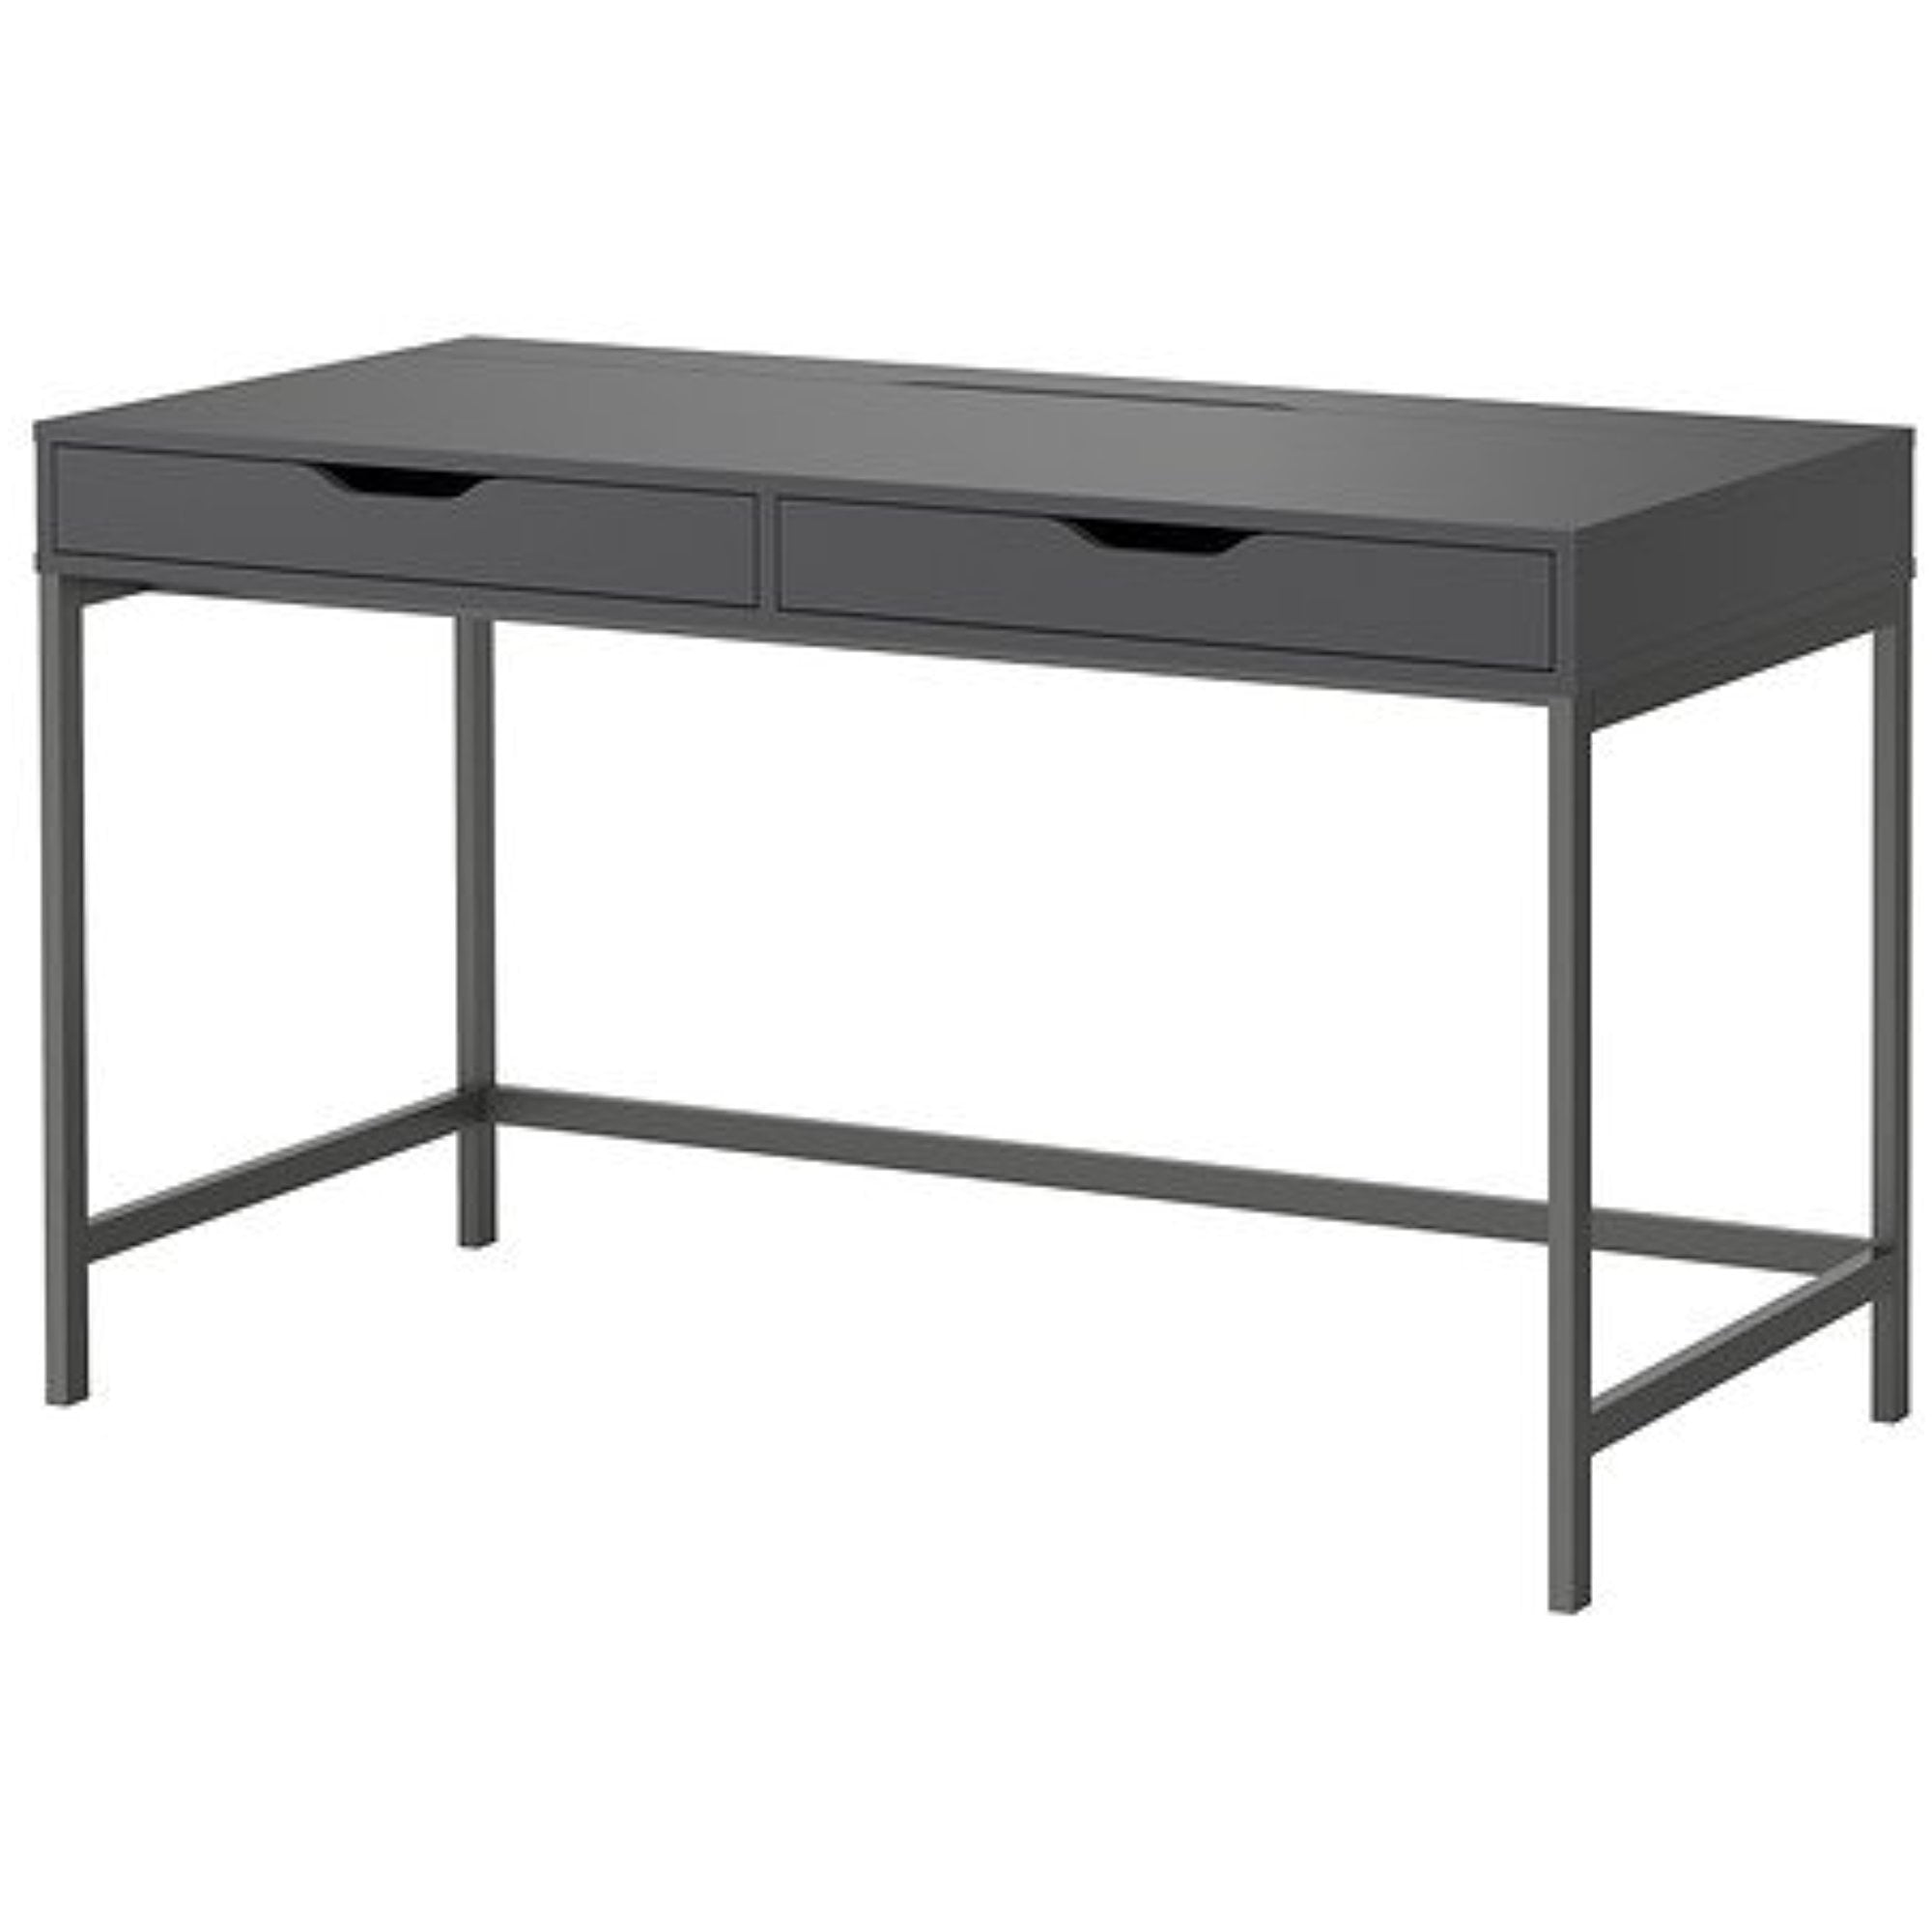 Ikea Gray Computer Desk With Drawers 51 5 8x23 5 8 38210 20223